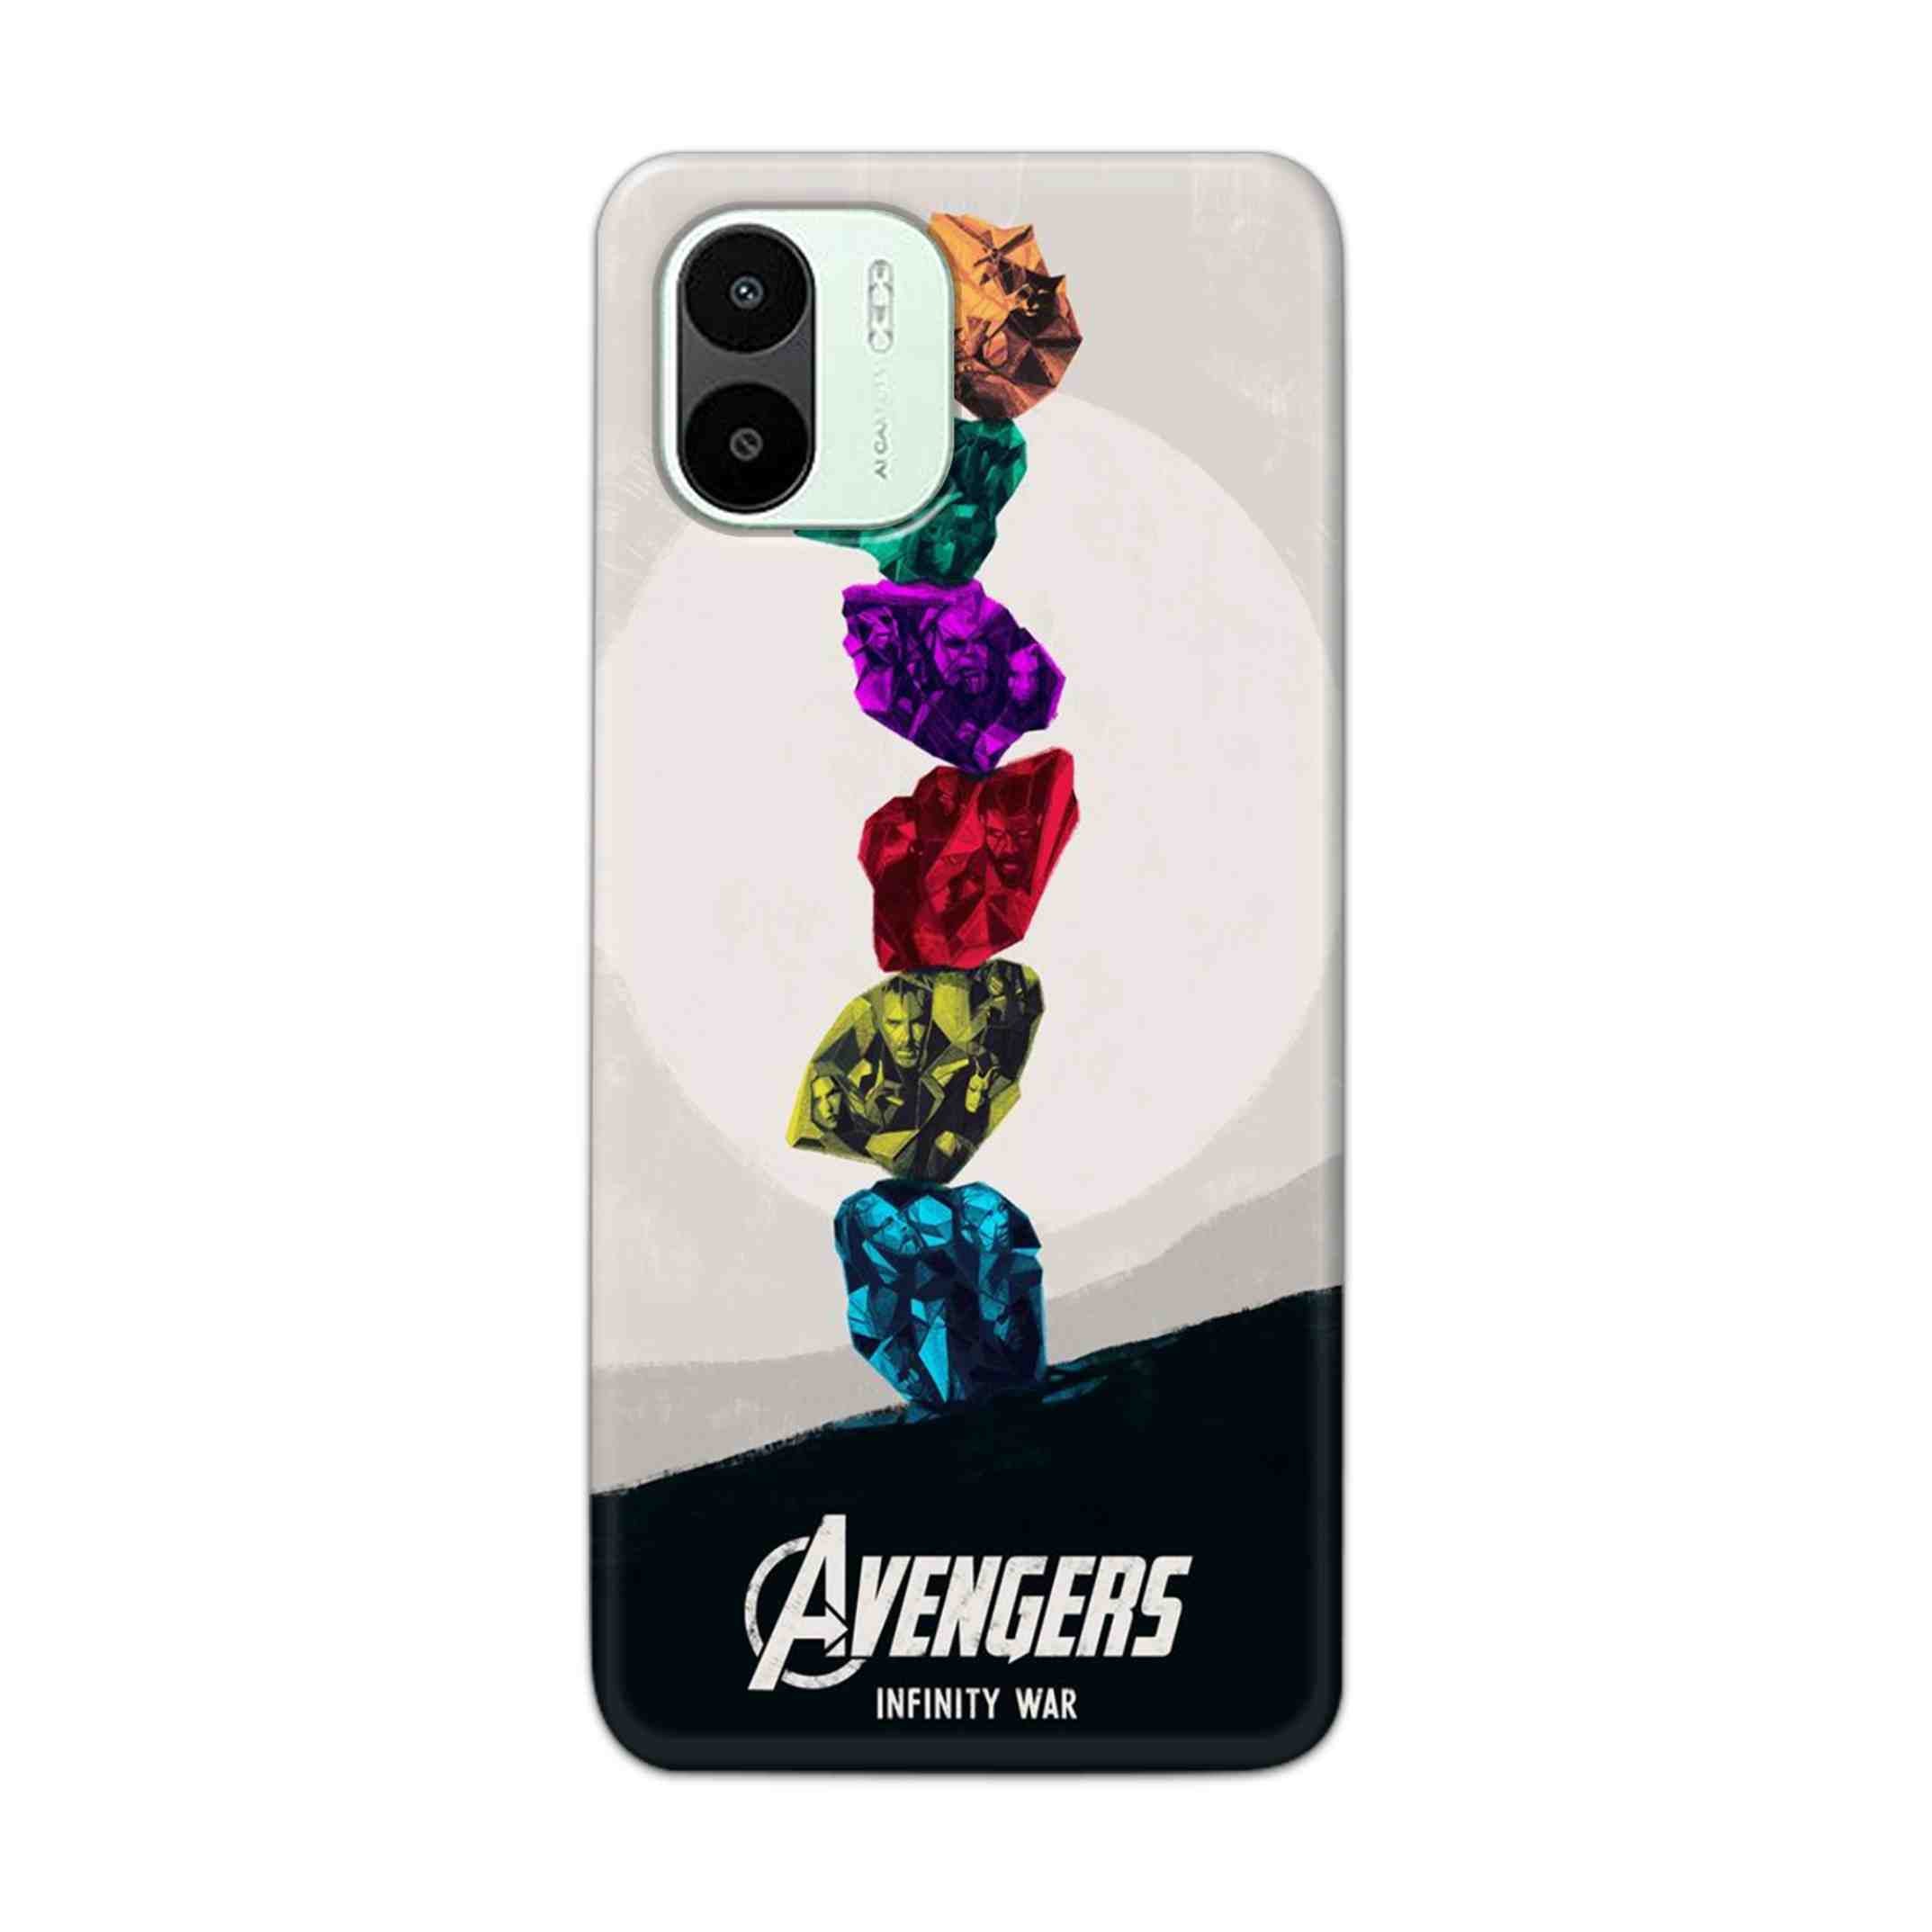 Buy Avengers Stone Hard Back Mobile Phone Case Cover For Xiaomi Redmi A1 5G Online